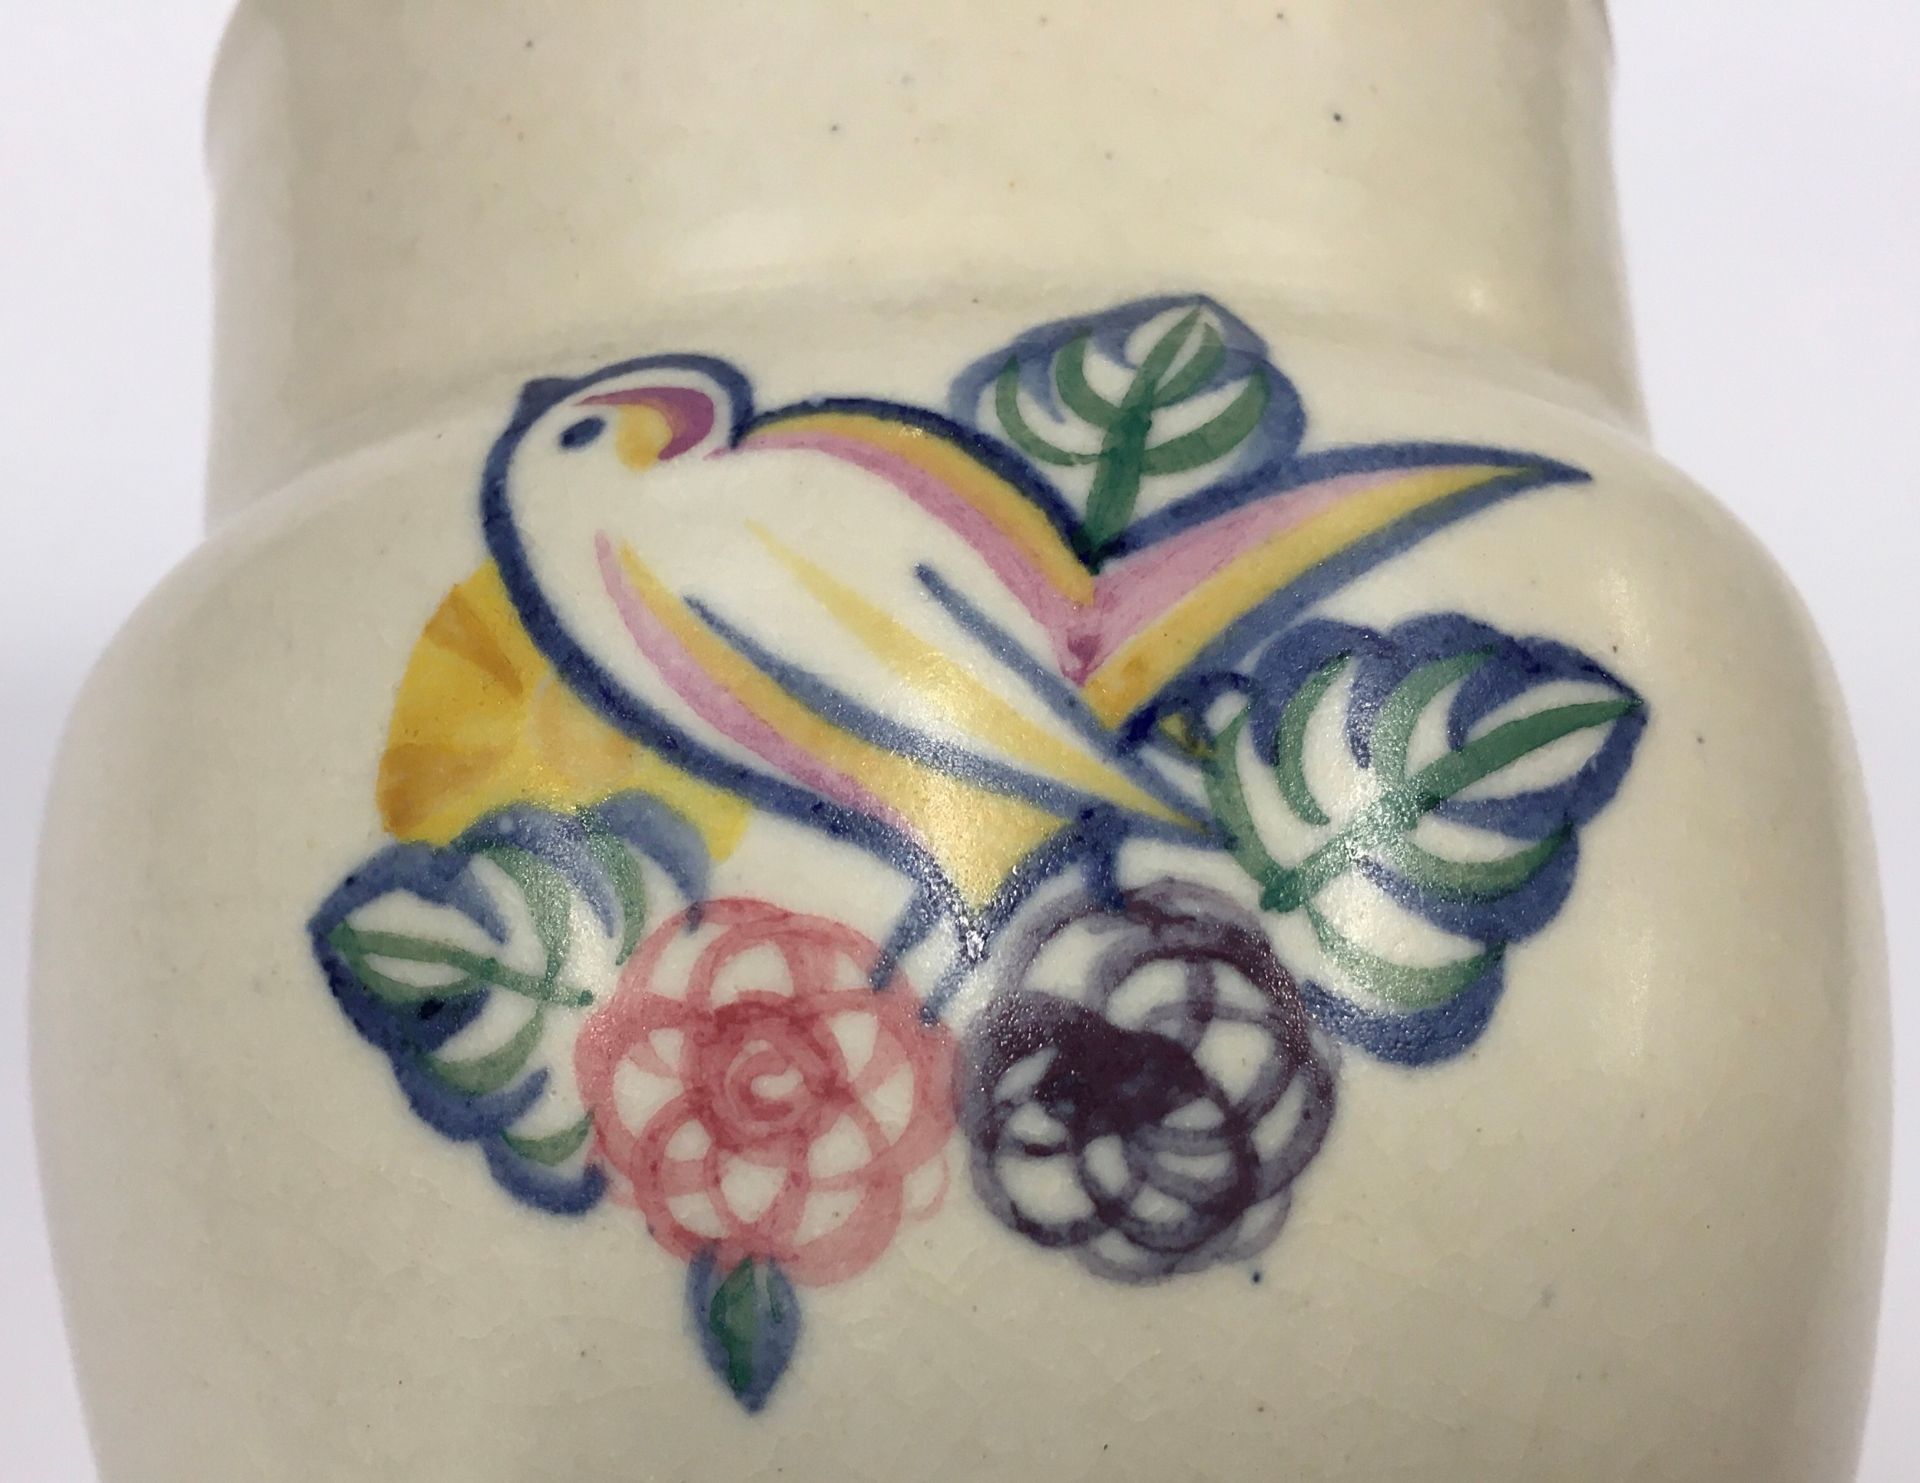 Poole Pottery Carter Stabler Adams shape 466 YY pattern vase decorated by Nellie Bishton (Blackmore) - Image 2 of 3